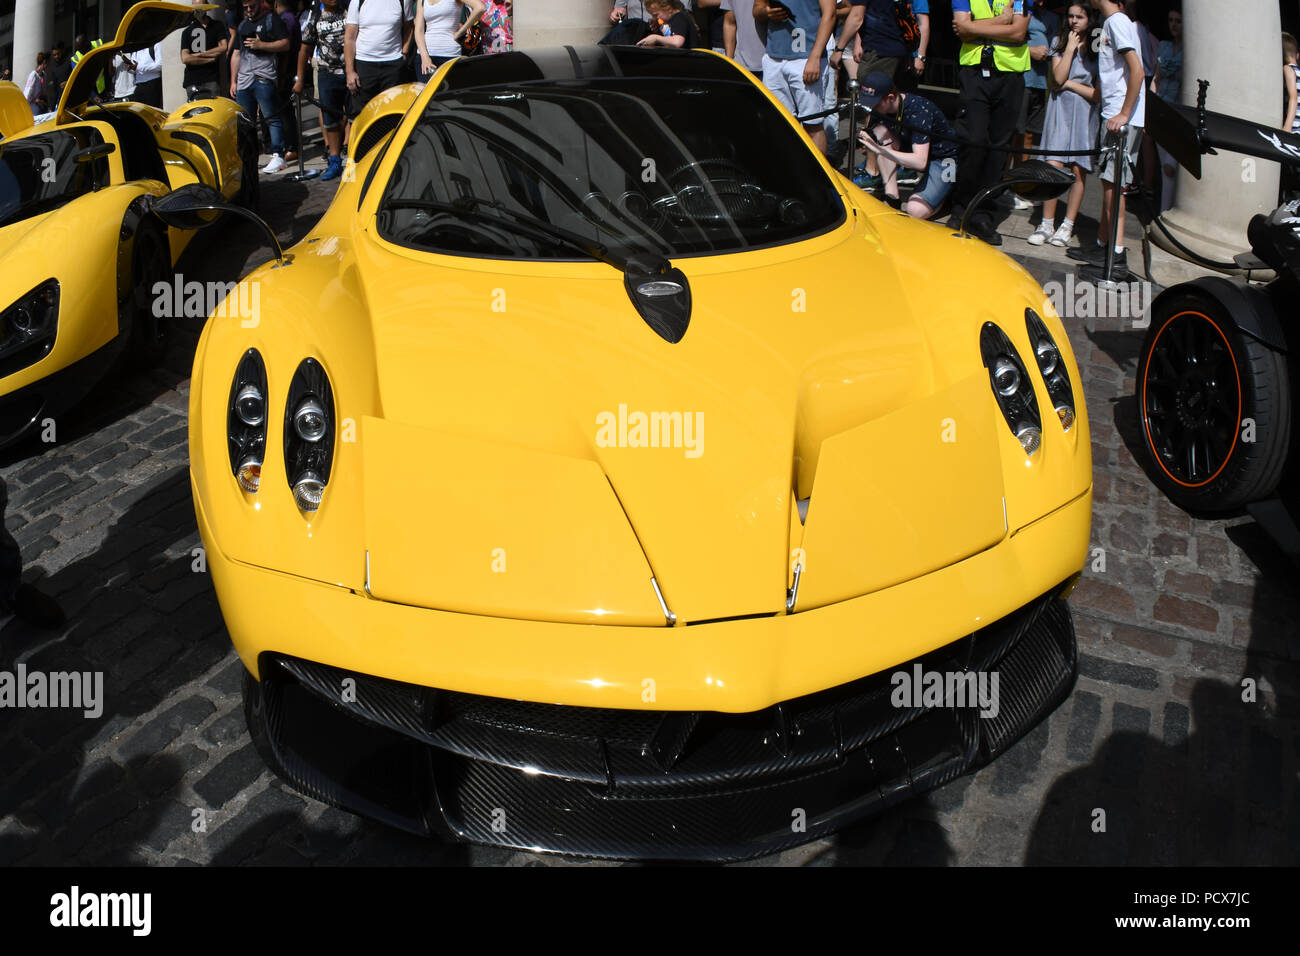 London, UK, 4 Aug 2018. Gumball 3000 rally 2018: One hundred supercars display in Covent garden on August 4 2018, London, UK. Credit: Picture Capital/Alamy Live News Stock Photo